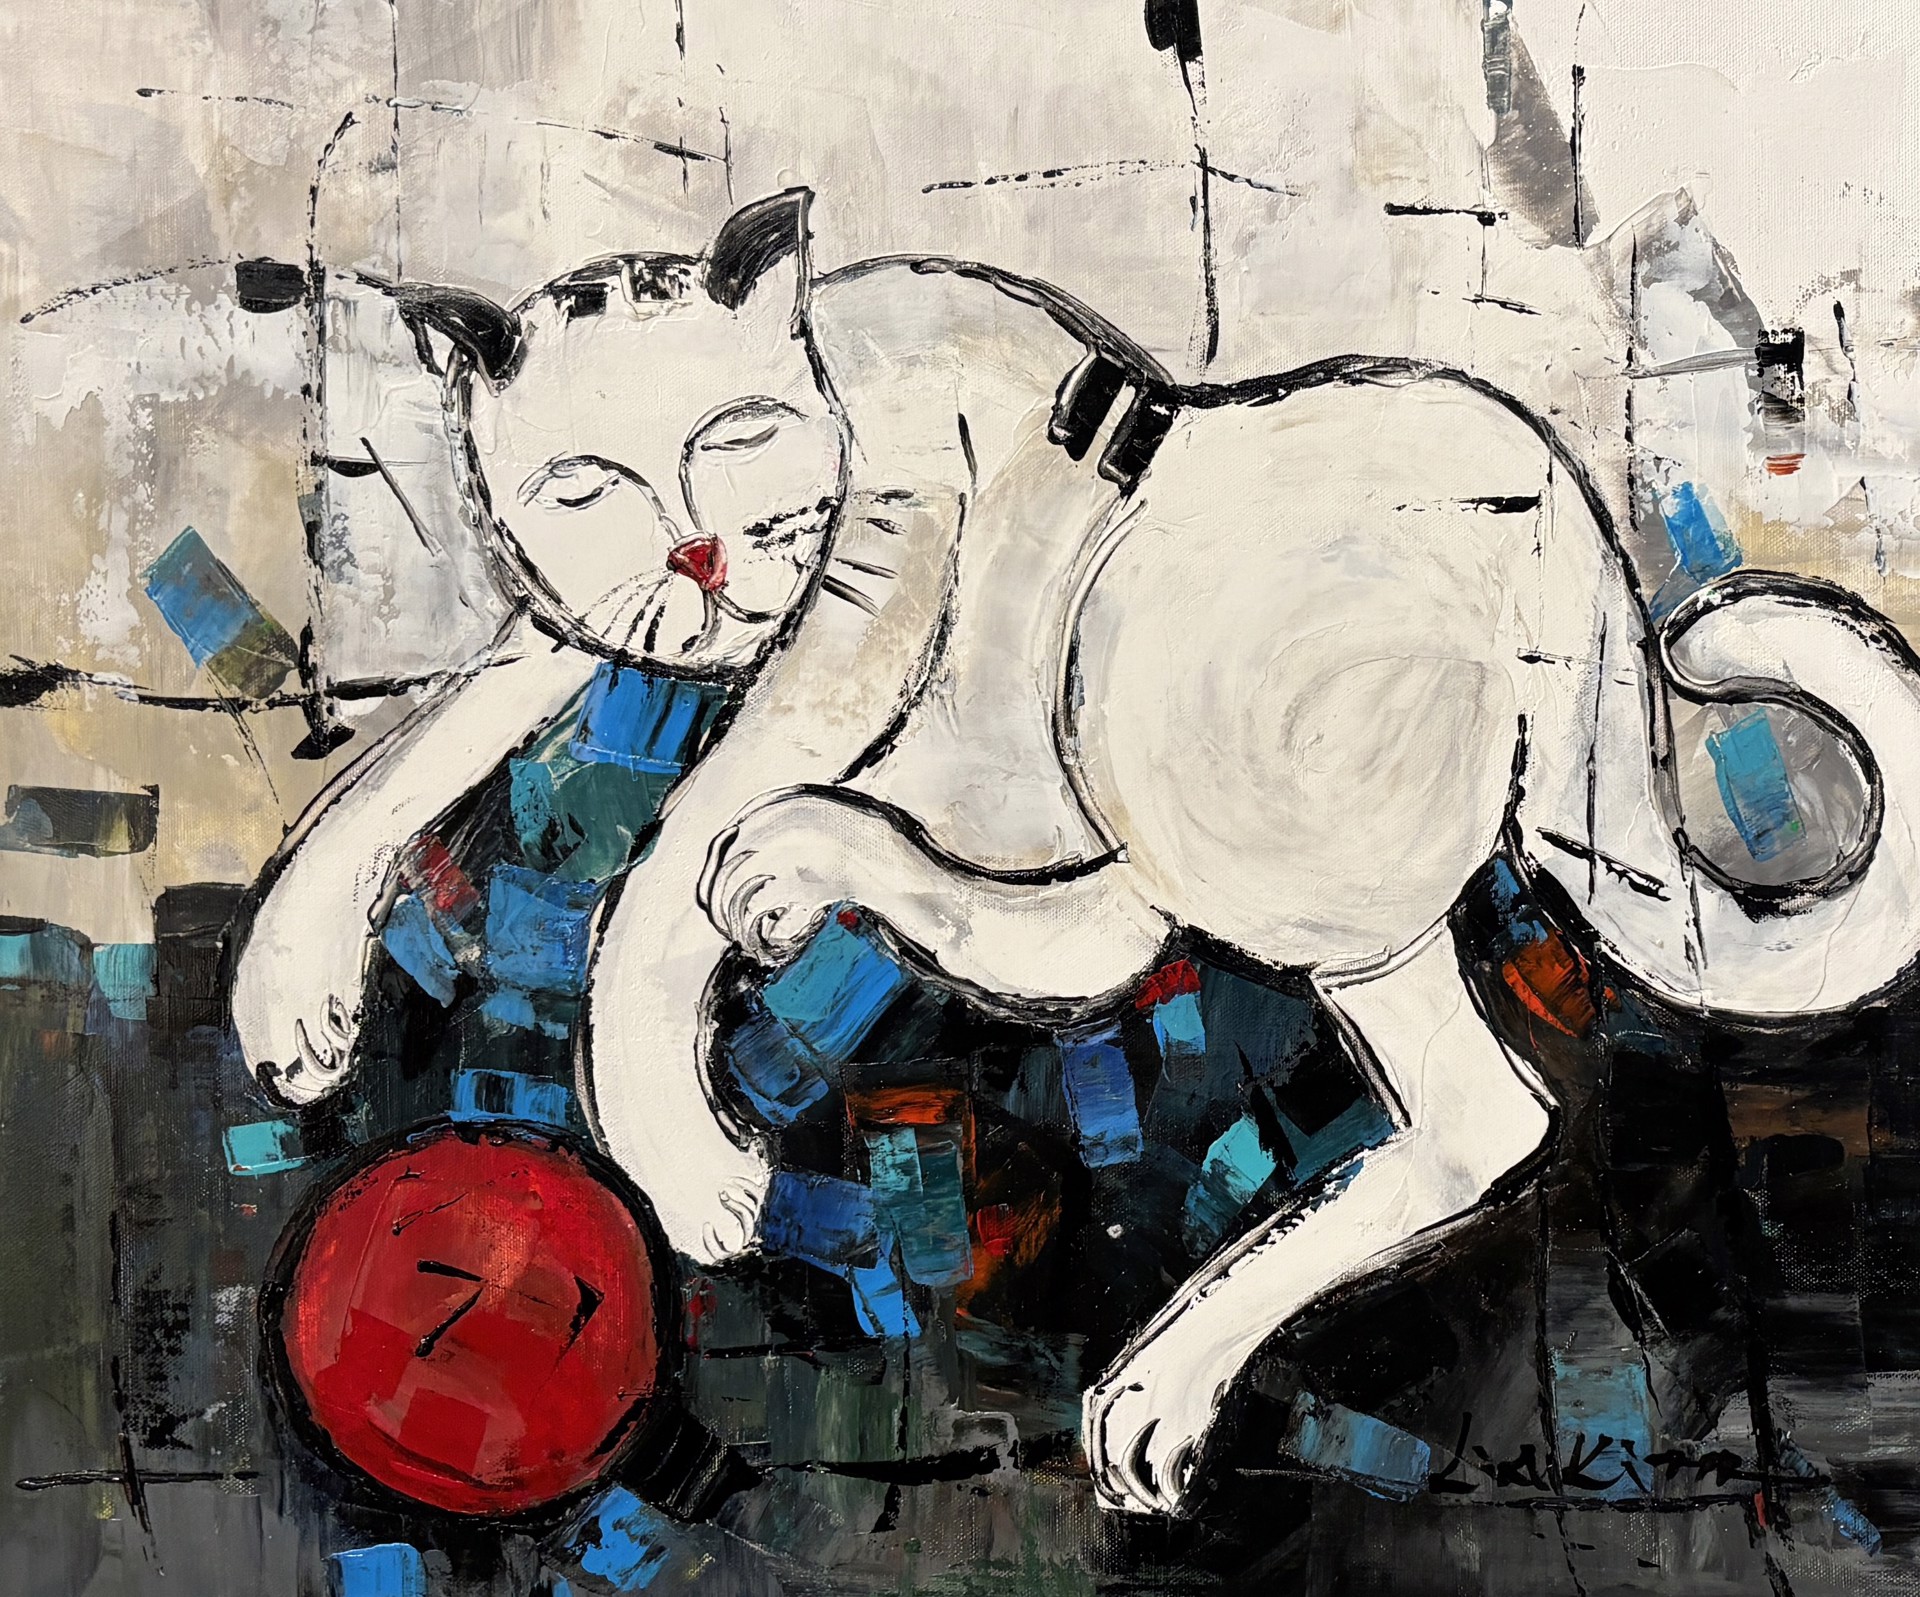 WHITE CAT WITH RED BALL by LIA KIM